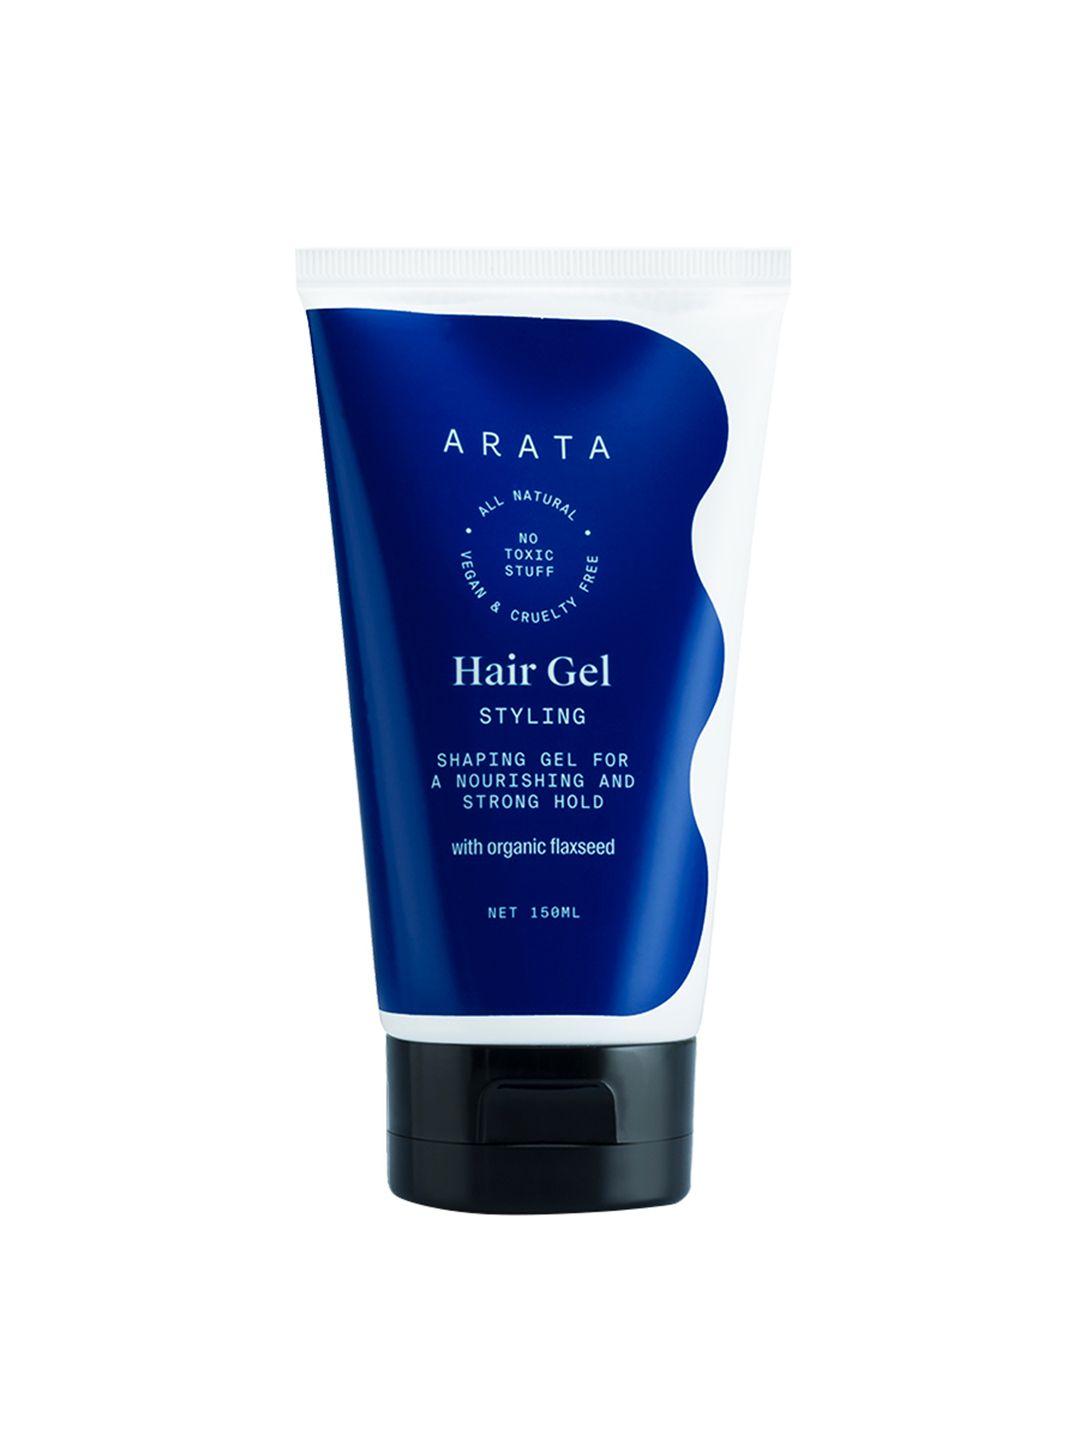 arata all natural styling hair gel with organic flaxseed - 150ml